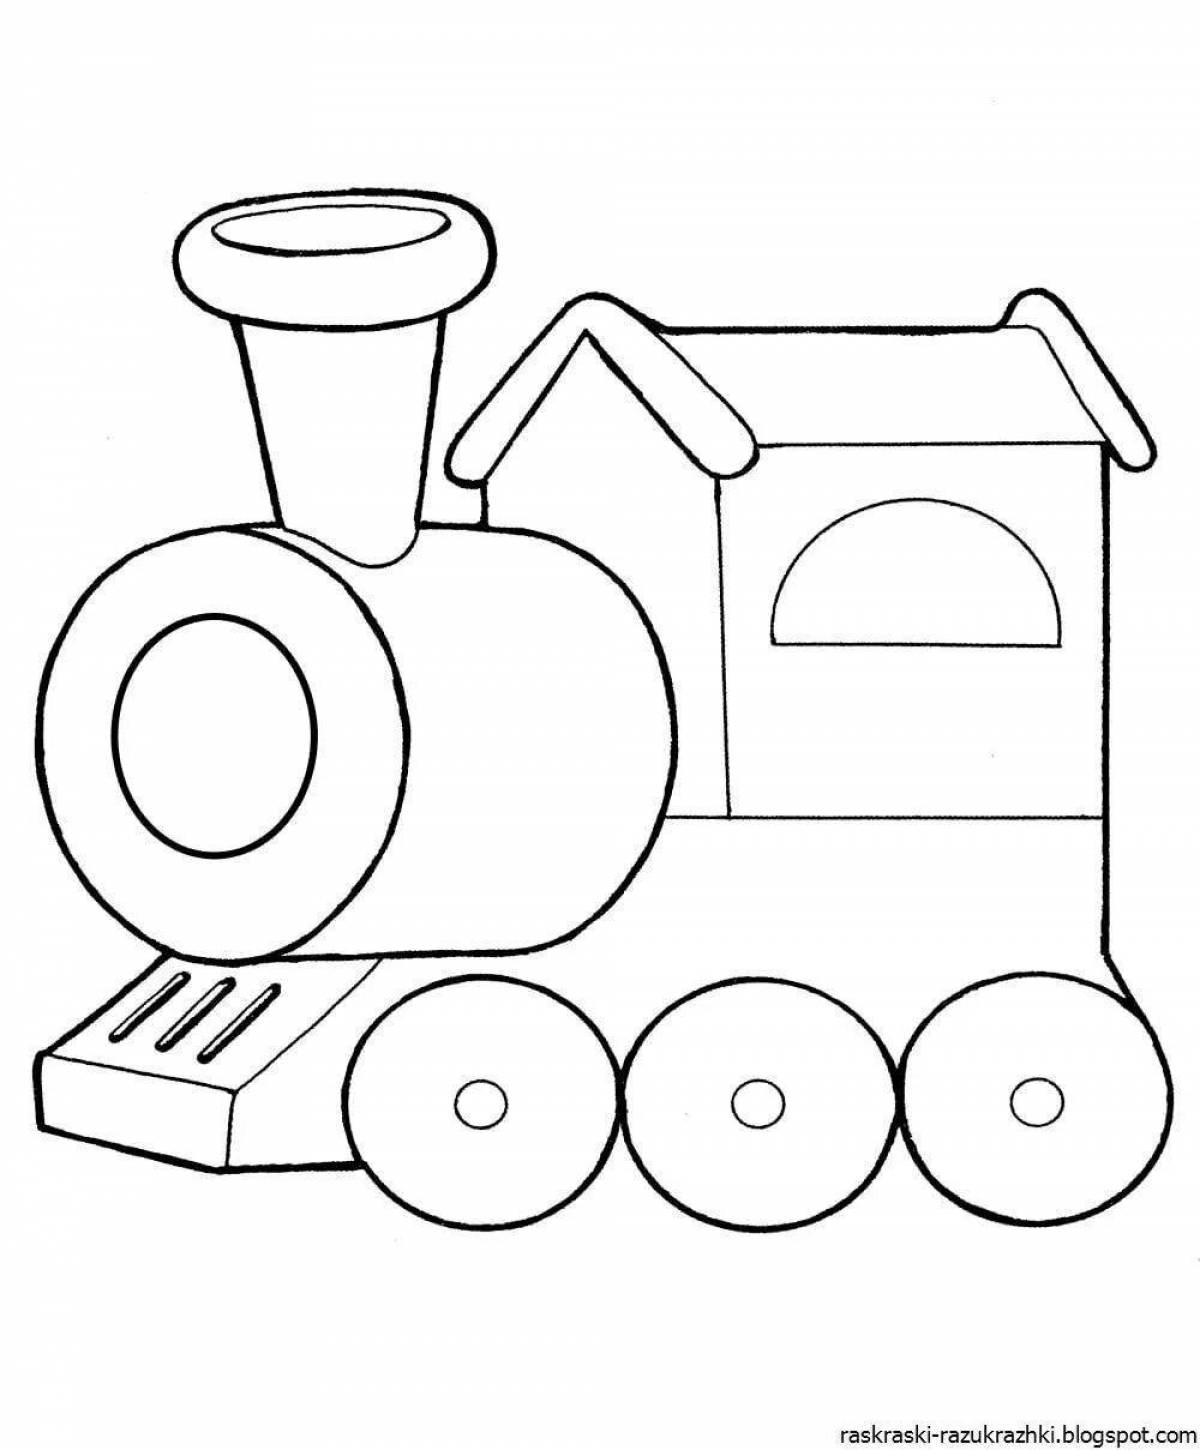 Adorable train coloring book for 2-3 year olds